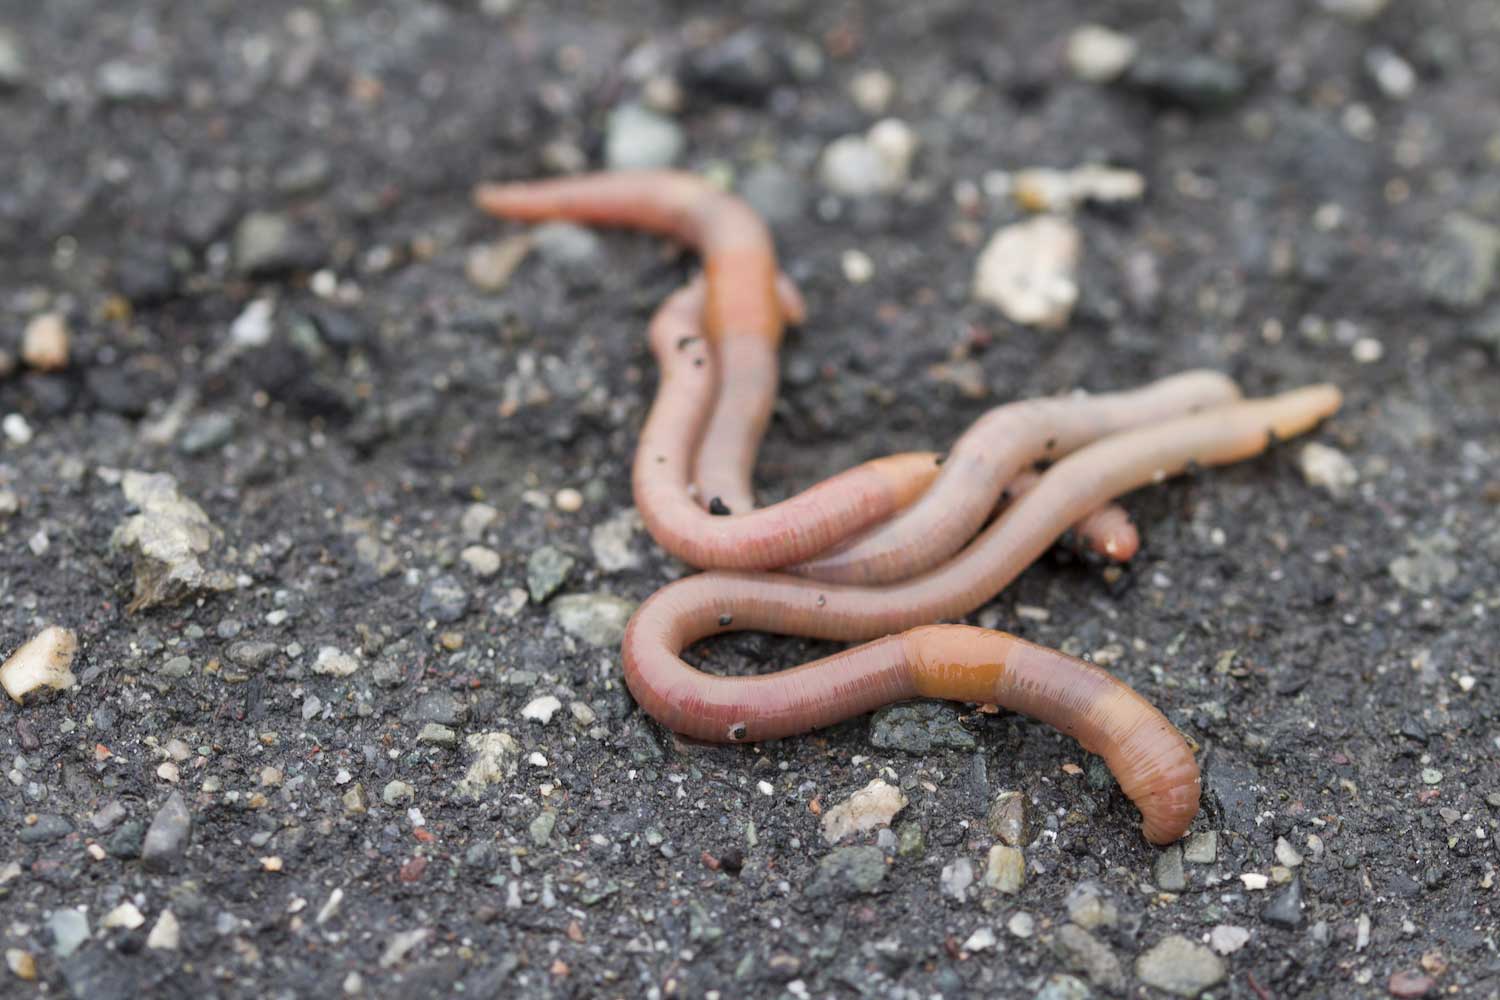 Nature curiosity: Why do worms come to the surface when it rains